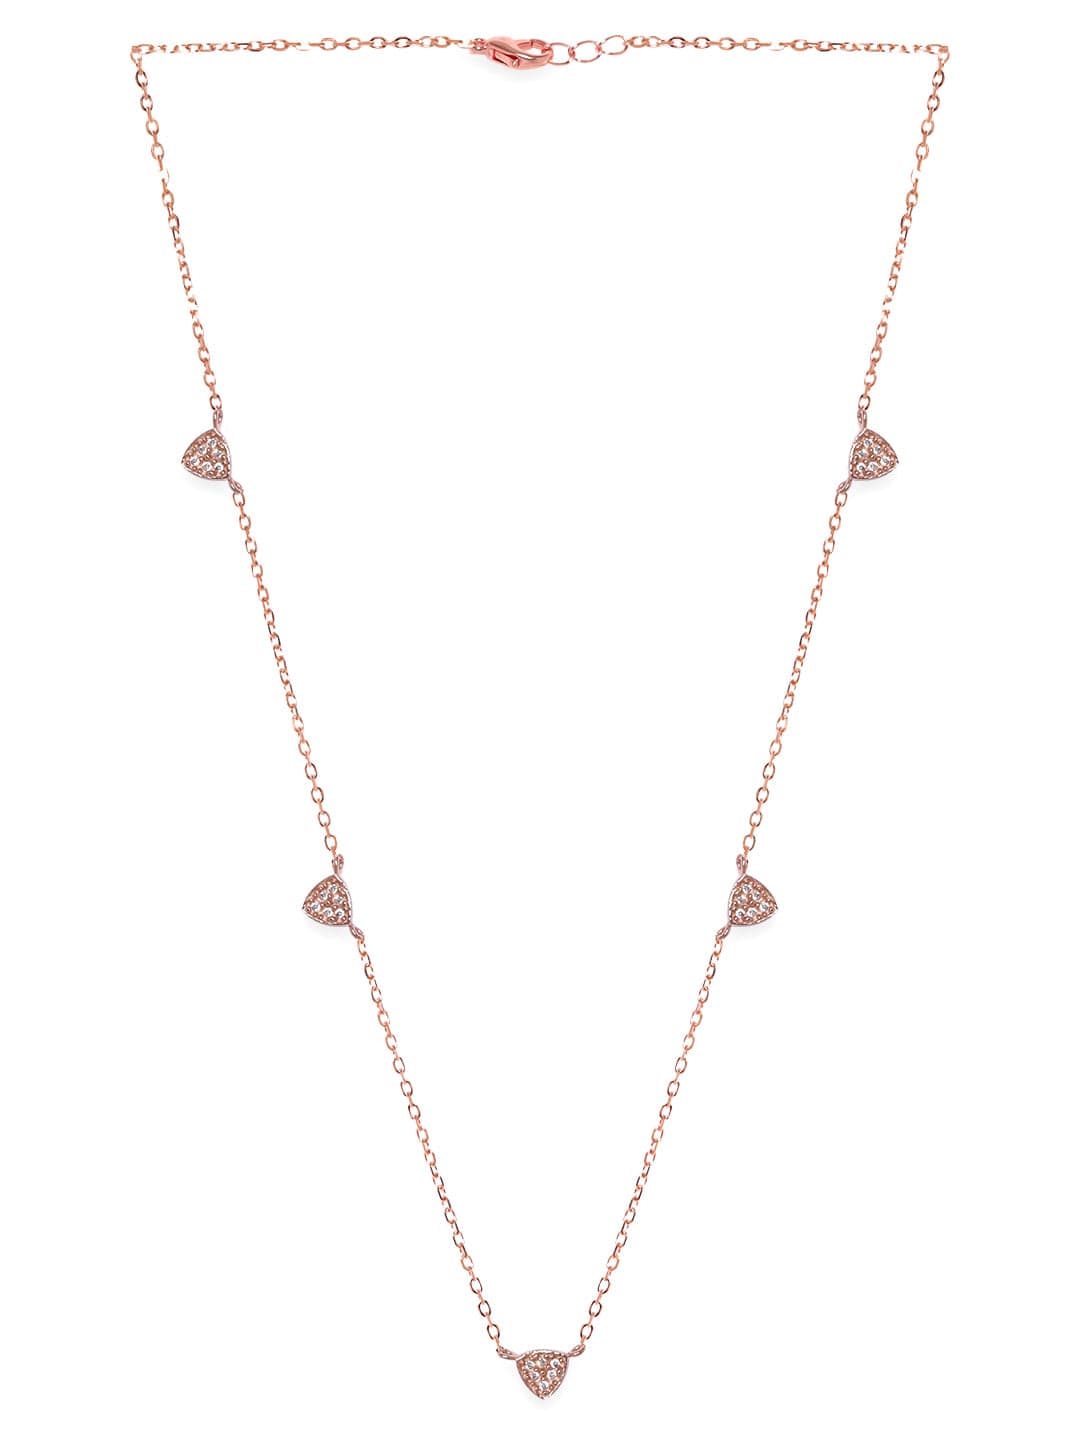 Rubans 925 Silver 18K Rose Gold Plated Heart Charm Necklace Necklaces, Necklace Sets, Chains & Mangalsutra